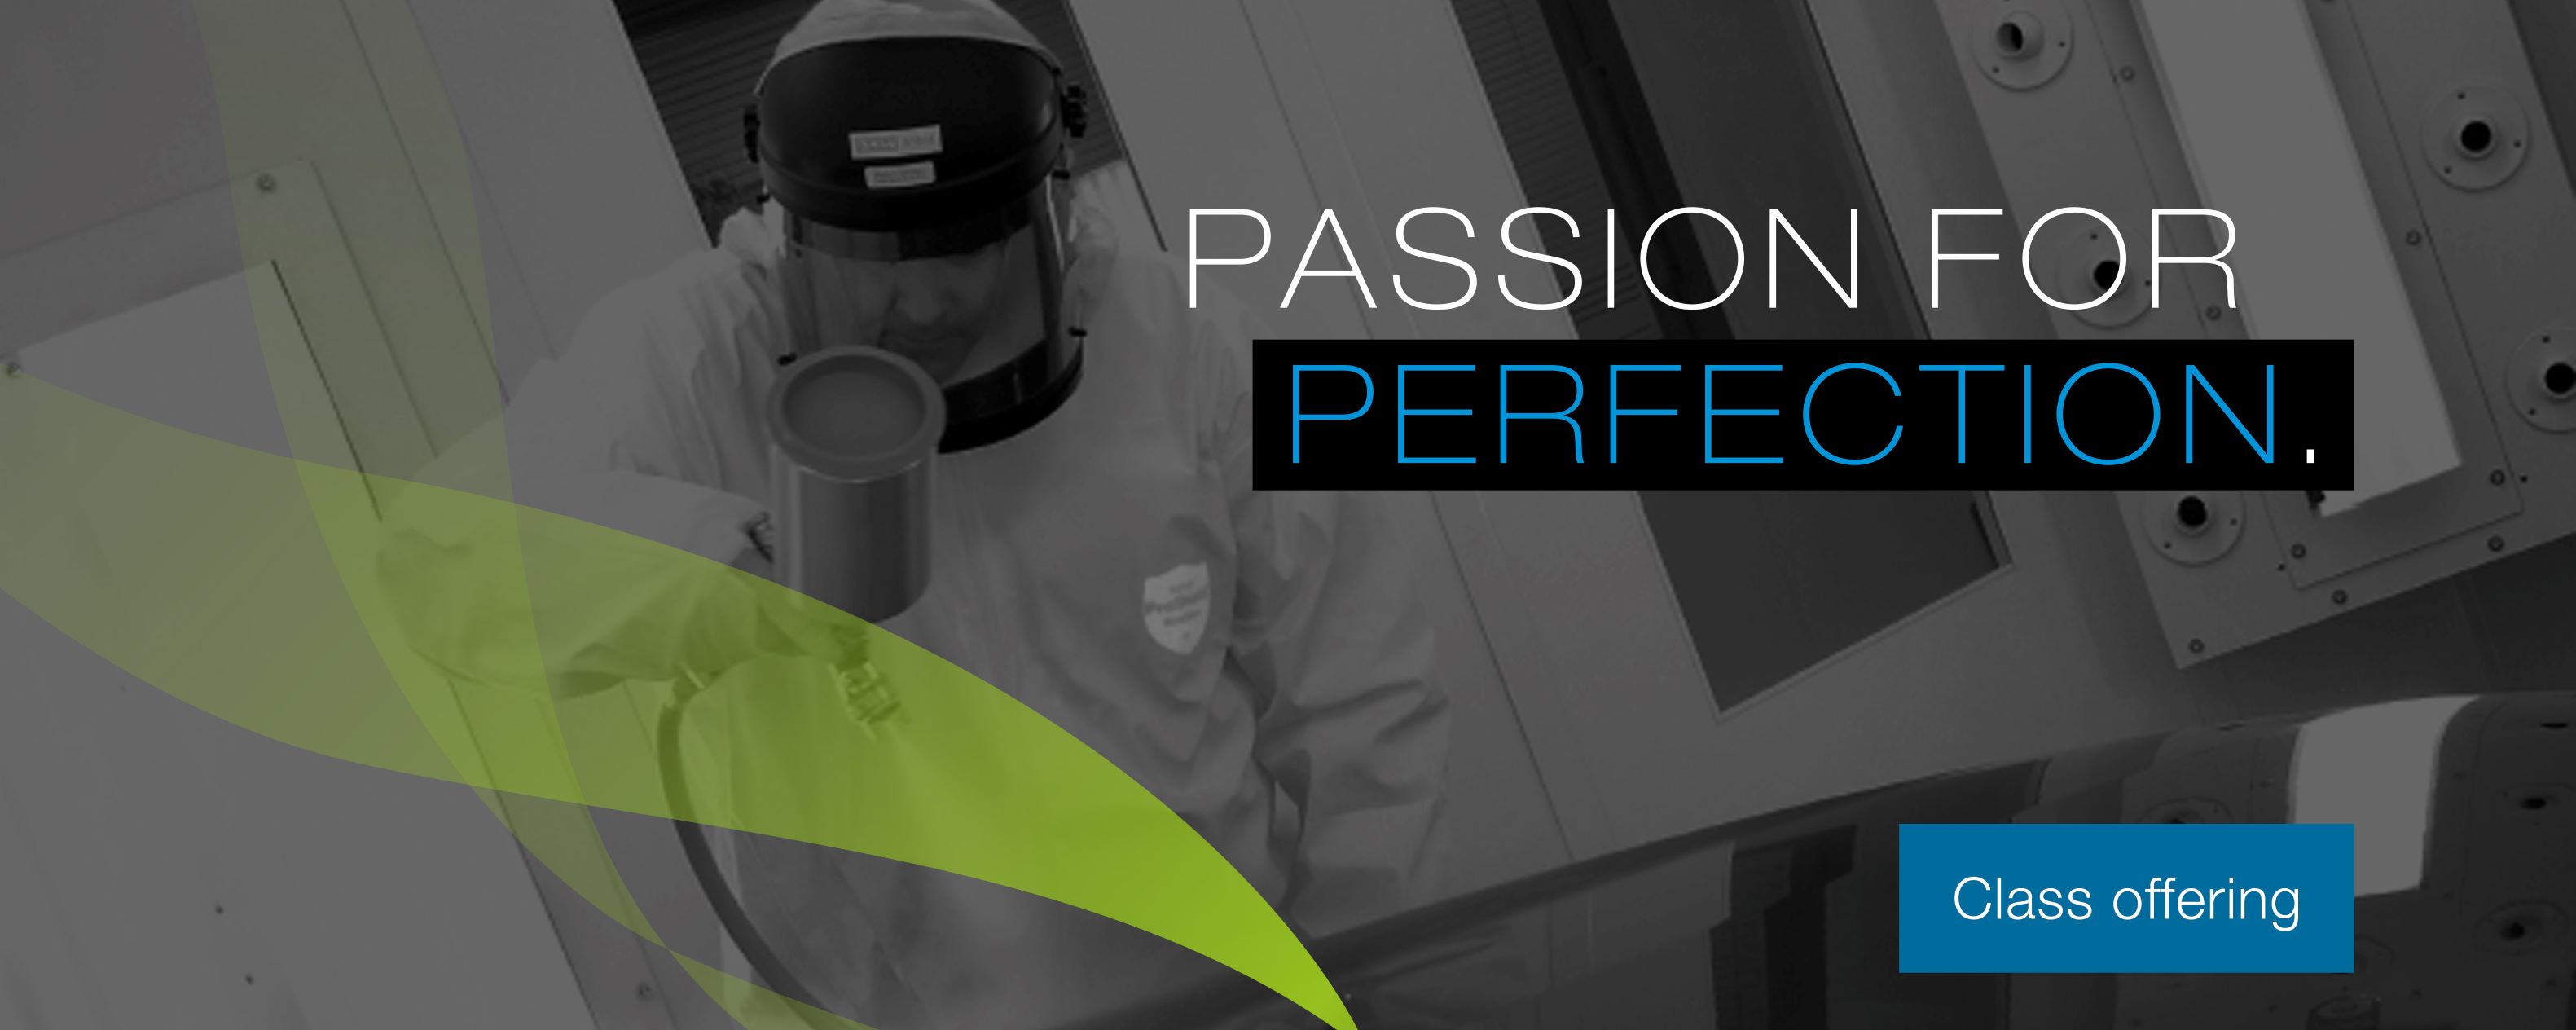 Passion for perfection - Class offering